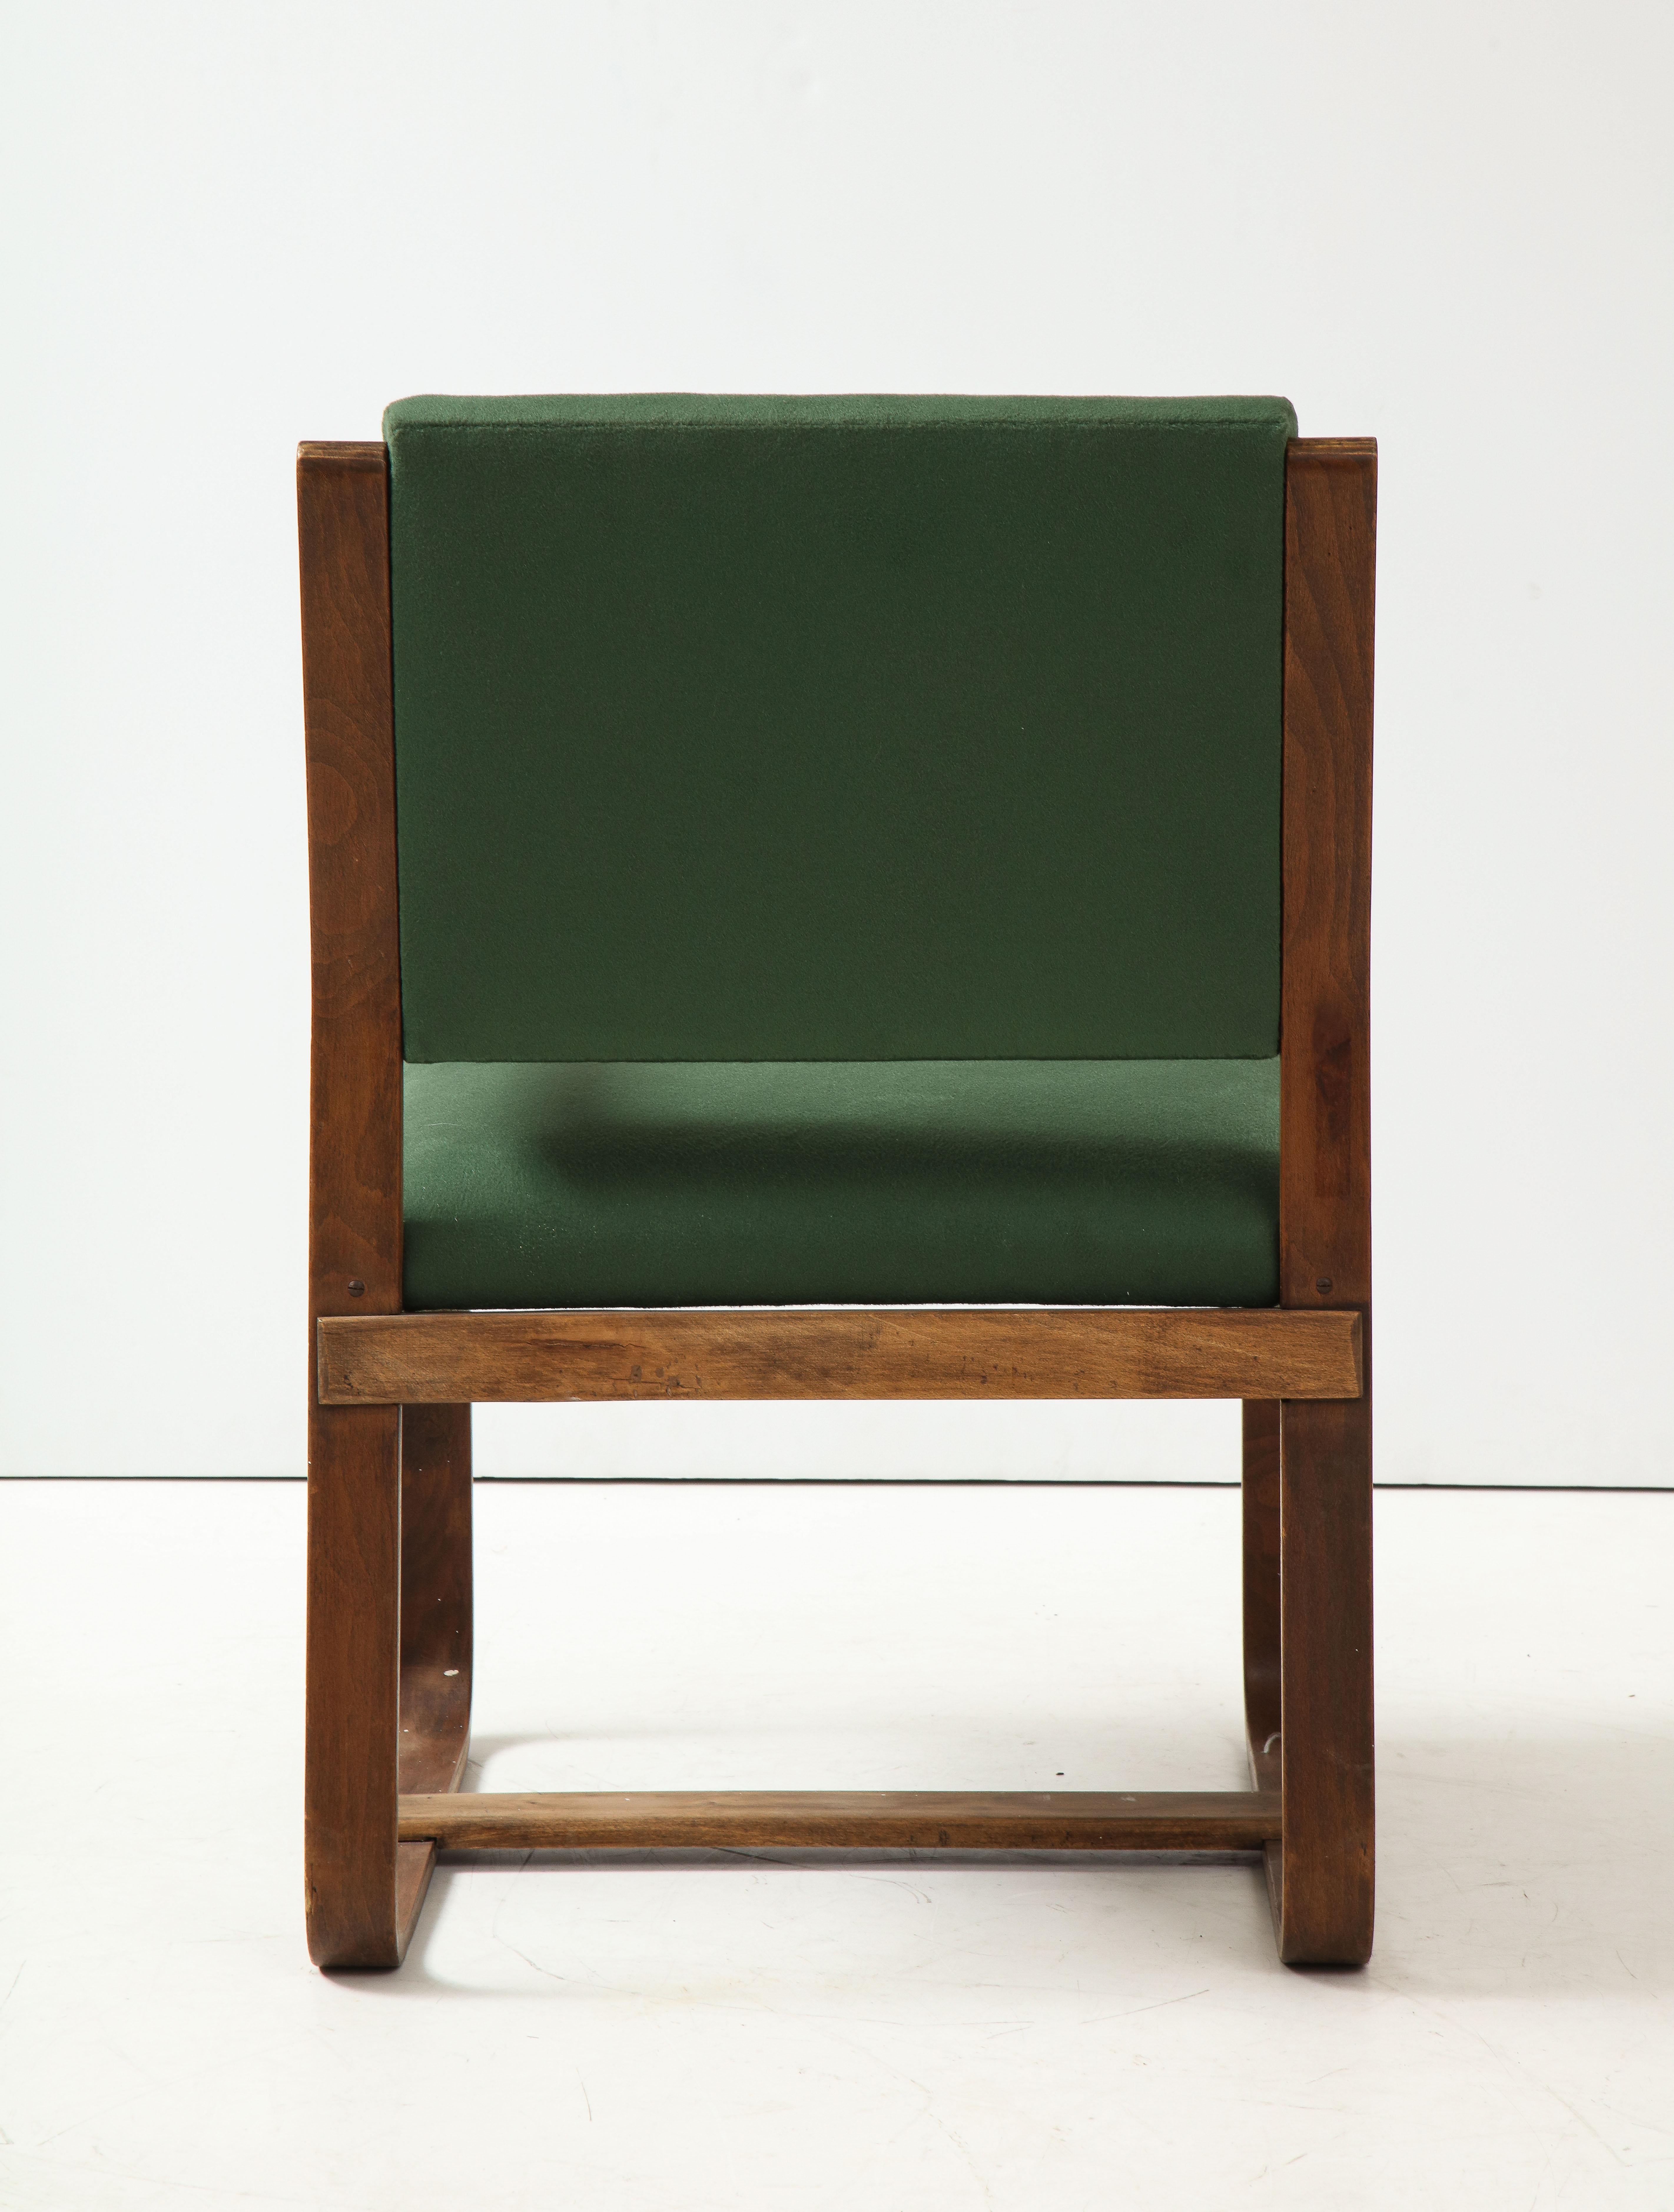 Curved Laminated Wood Armchair in Green Cashmere by Giuseppe Pagano, c. 1940s For Sale 1